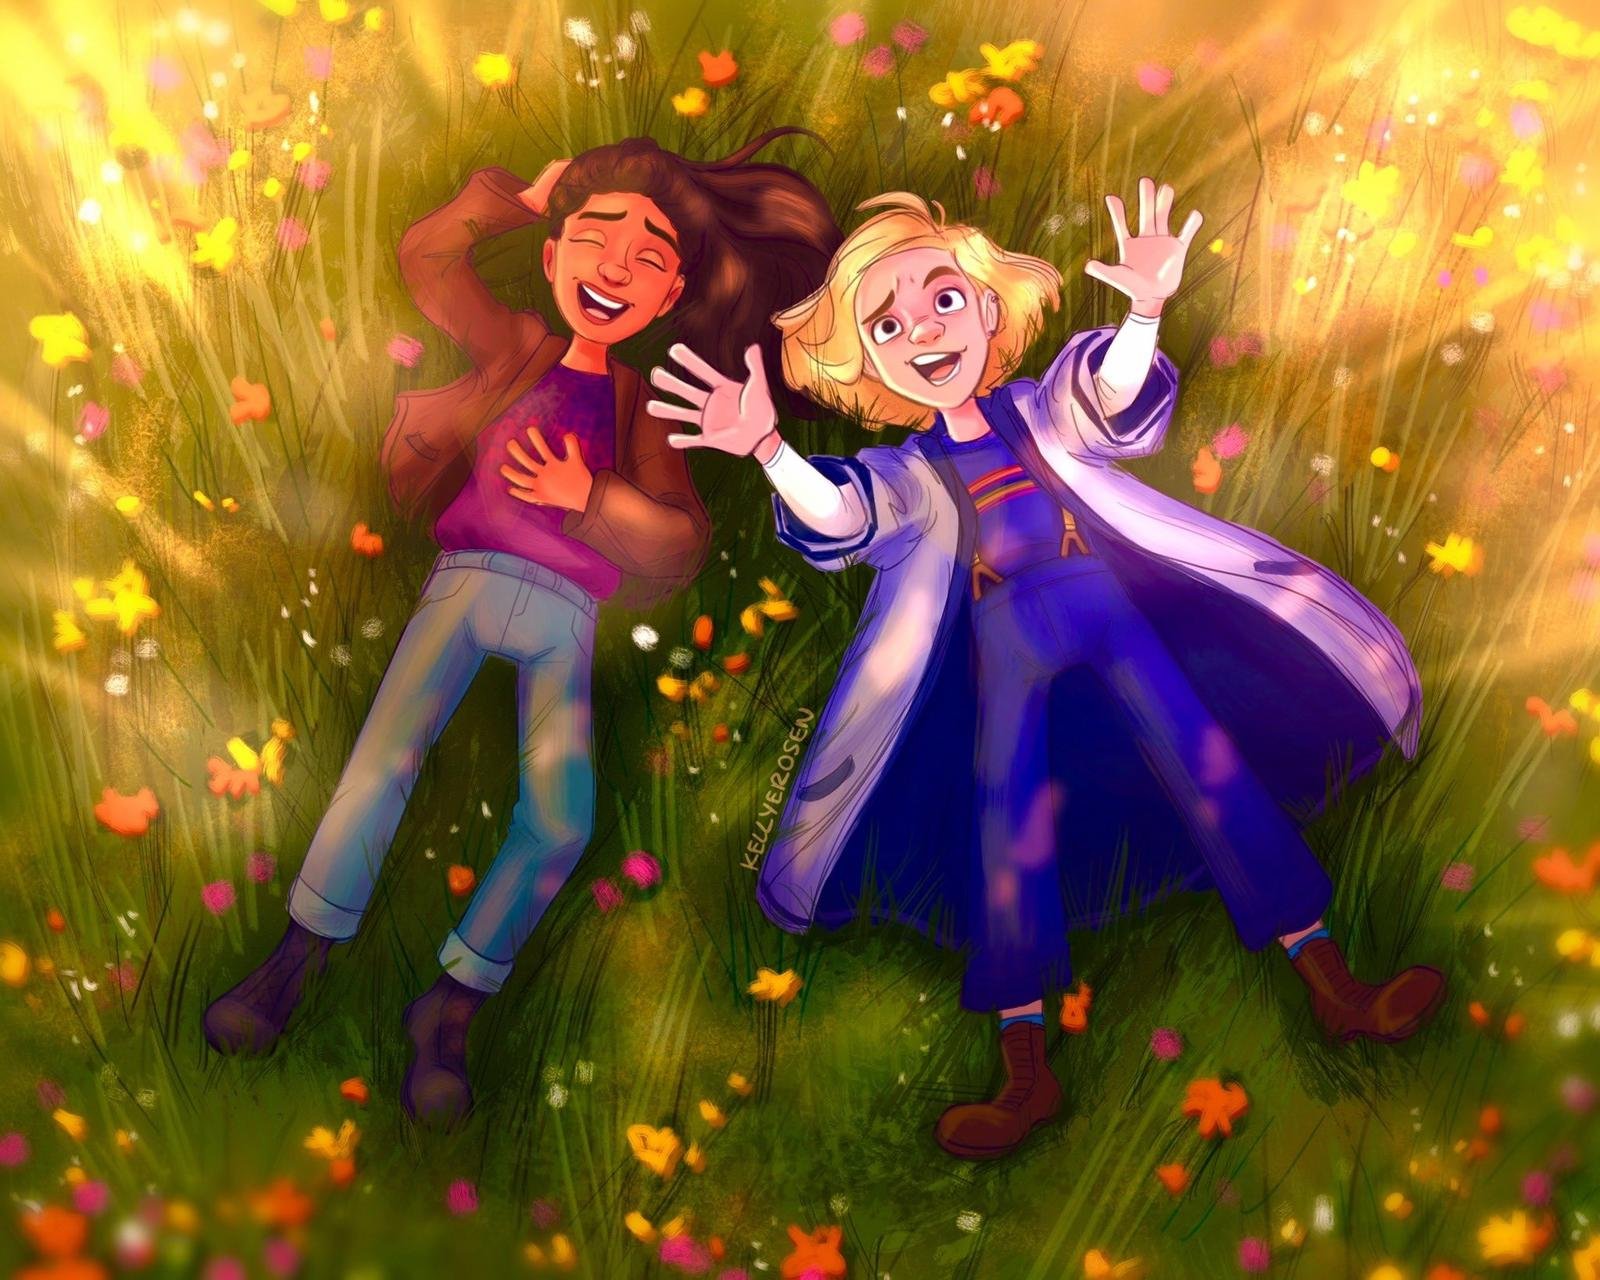 An illustration of Yaz and the Thirteenth Doctor lying on their backs in a field of flowers and looking up at the sky. Yaz is laughing and the Doctor is gesturing with her hands